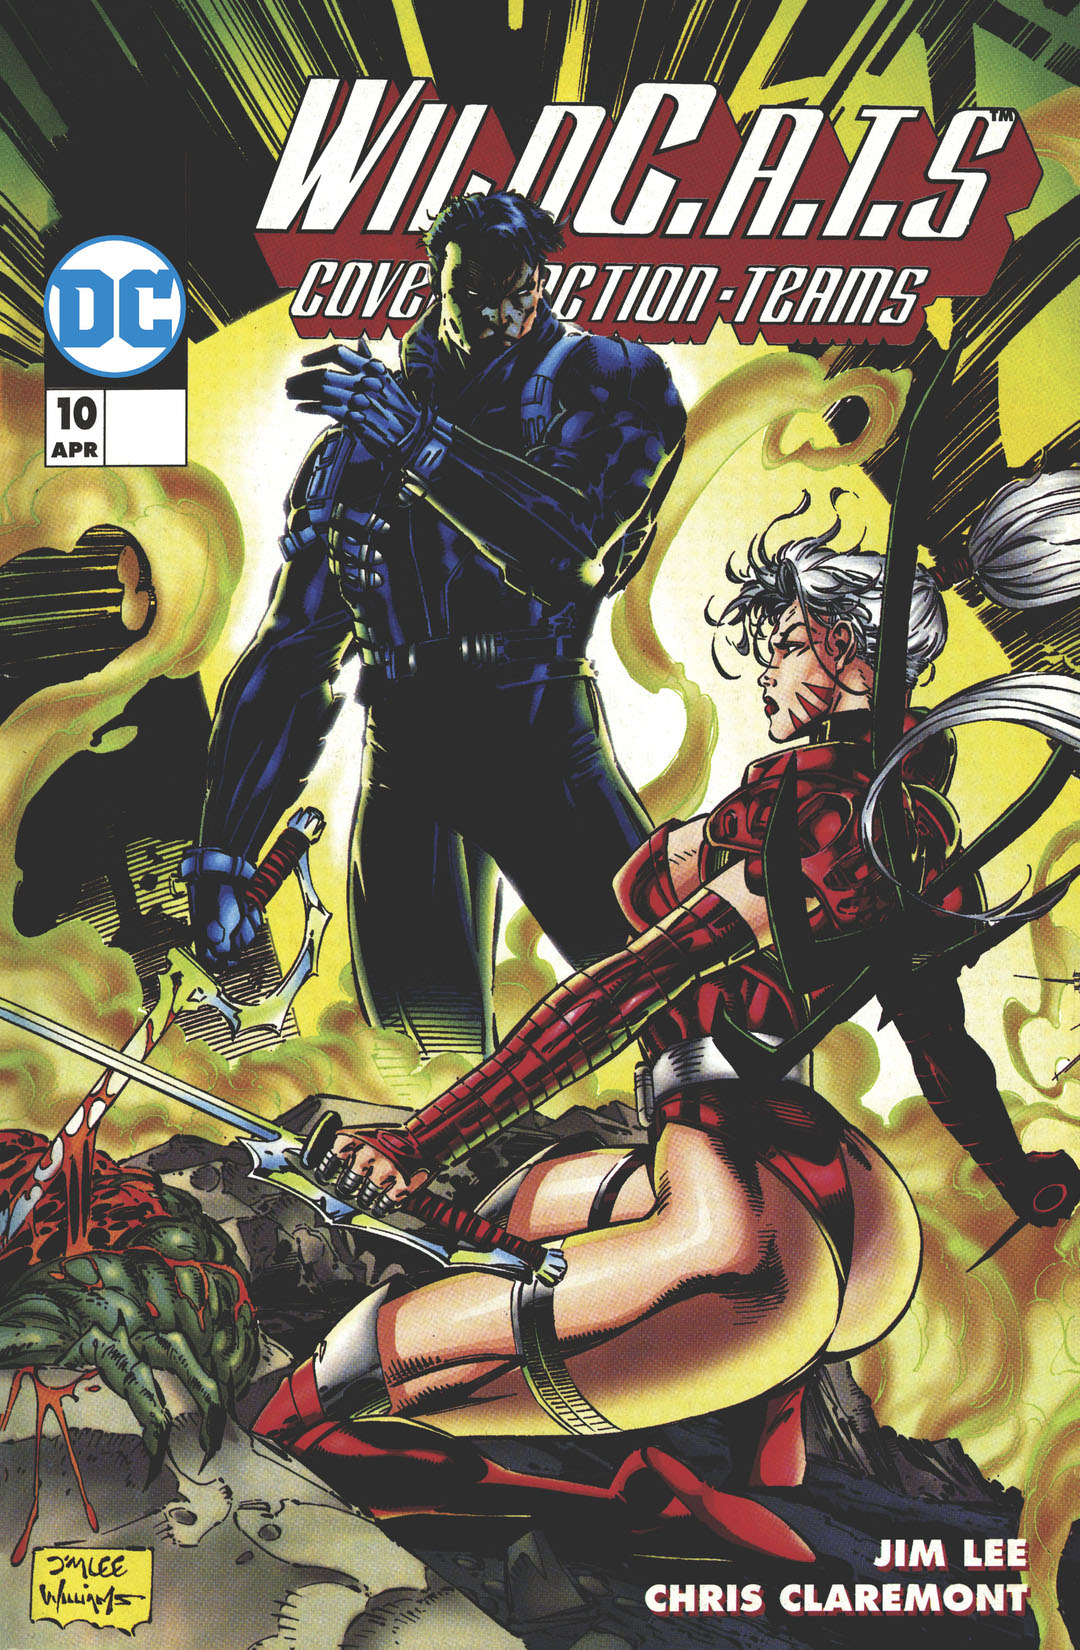 WildC.A.Ts: Covert Action Teams #10 preview images